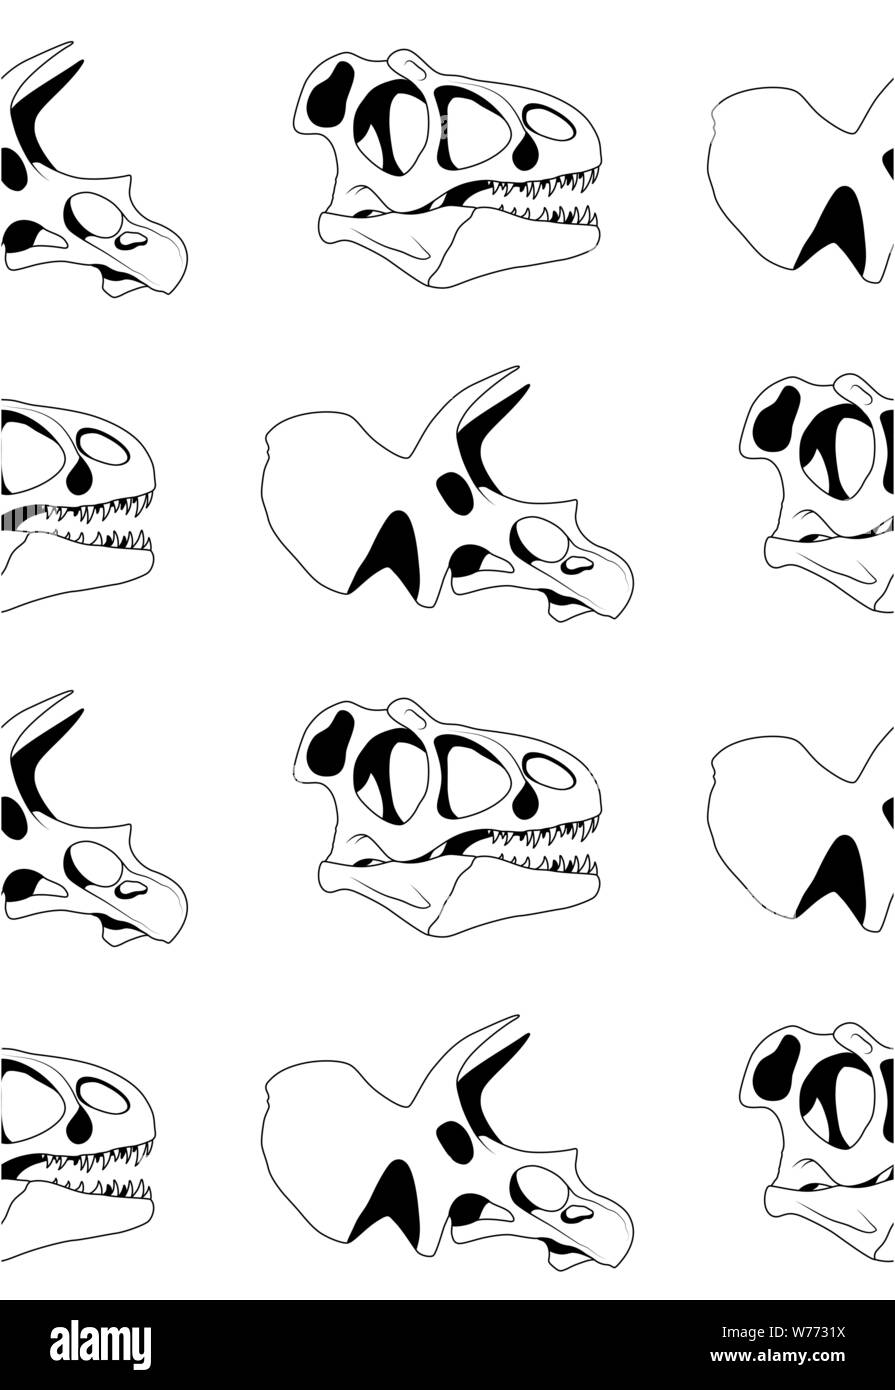 vector seamless pattern of black graphical tyrannosaur skull and triceratops skull on white background. Dinosaur texture Stock Vector